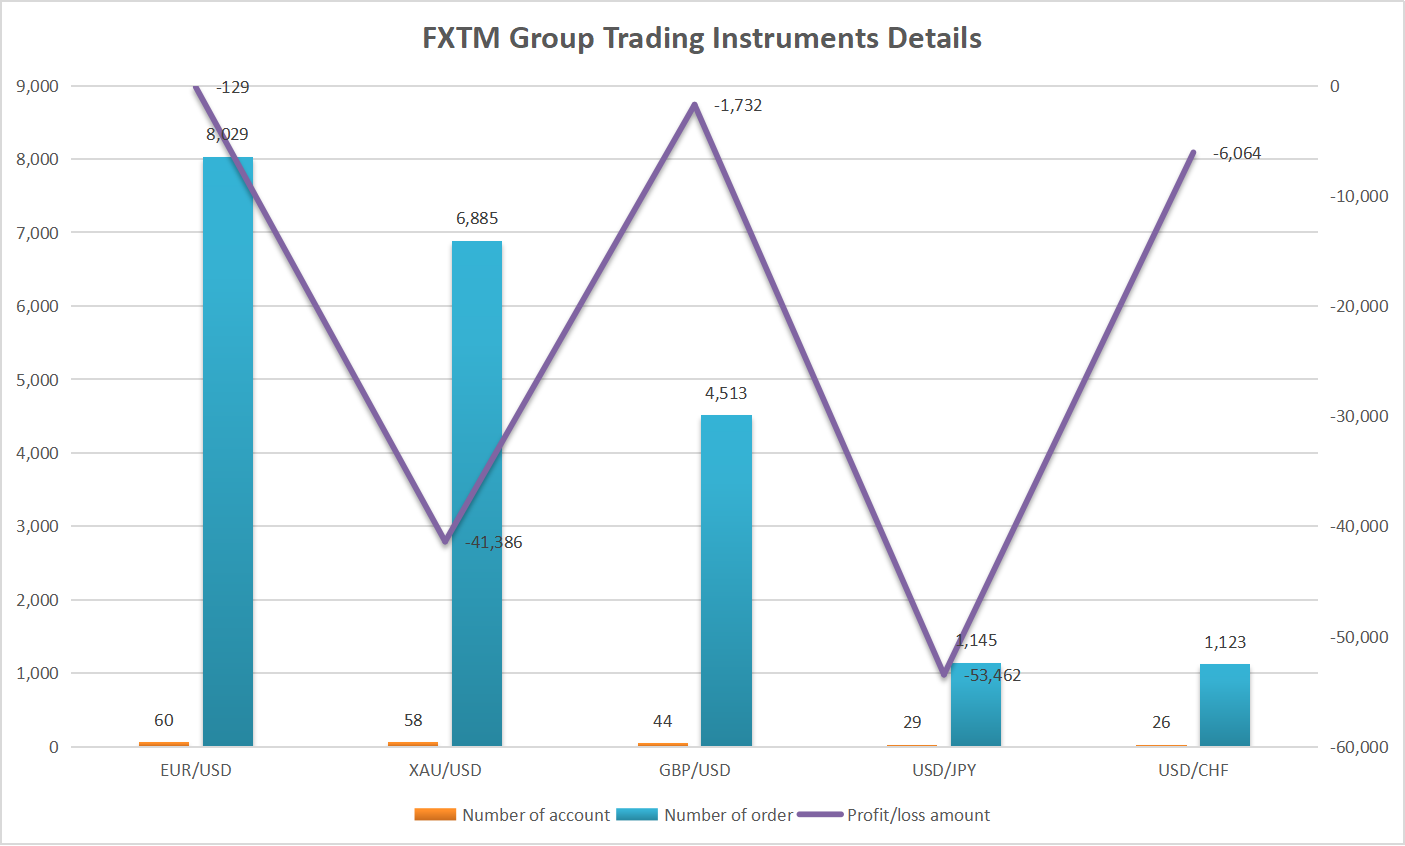 The winning rate of FXTM Group is 5% higher than the average of S12！